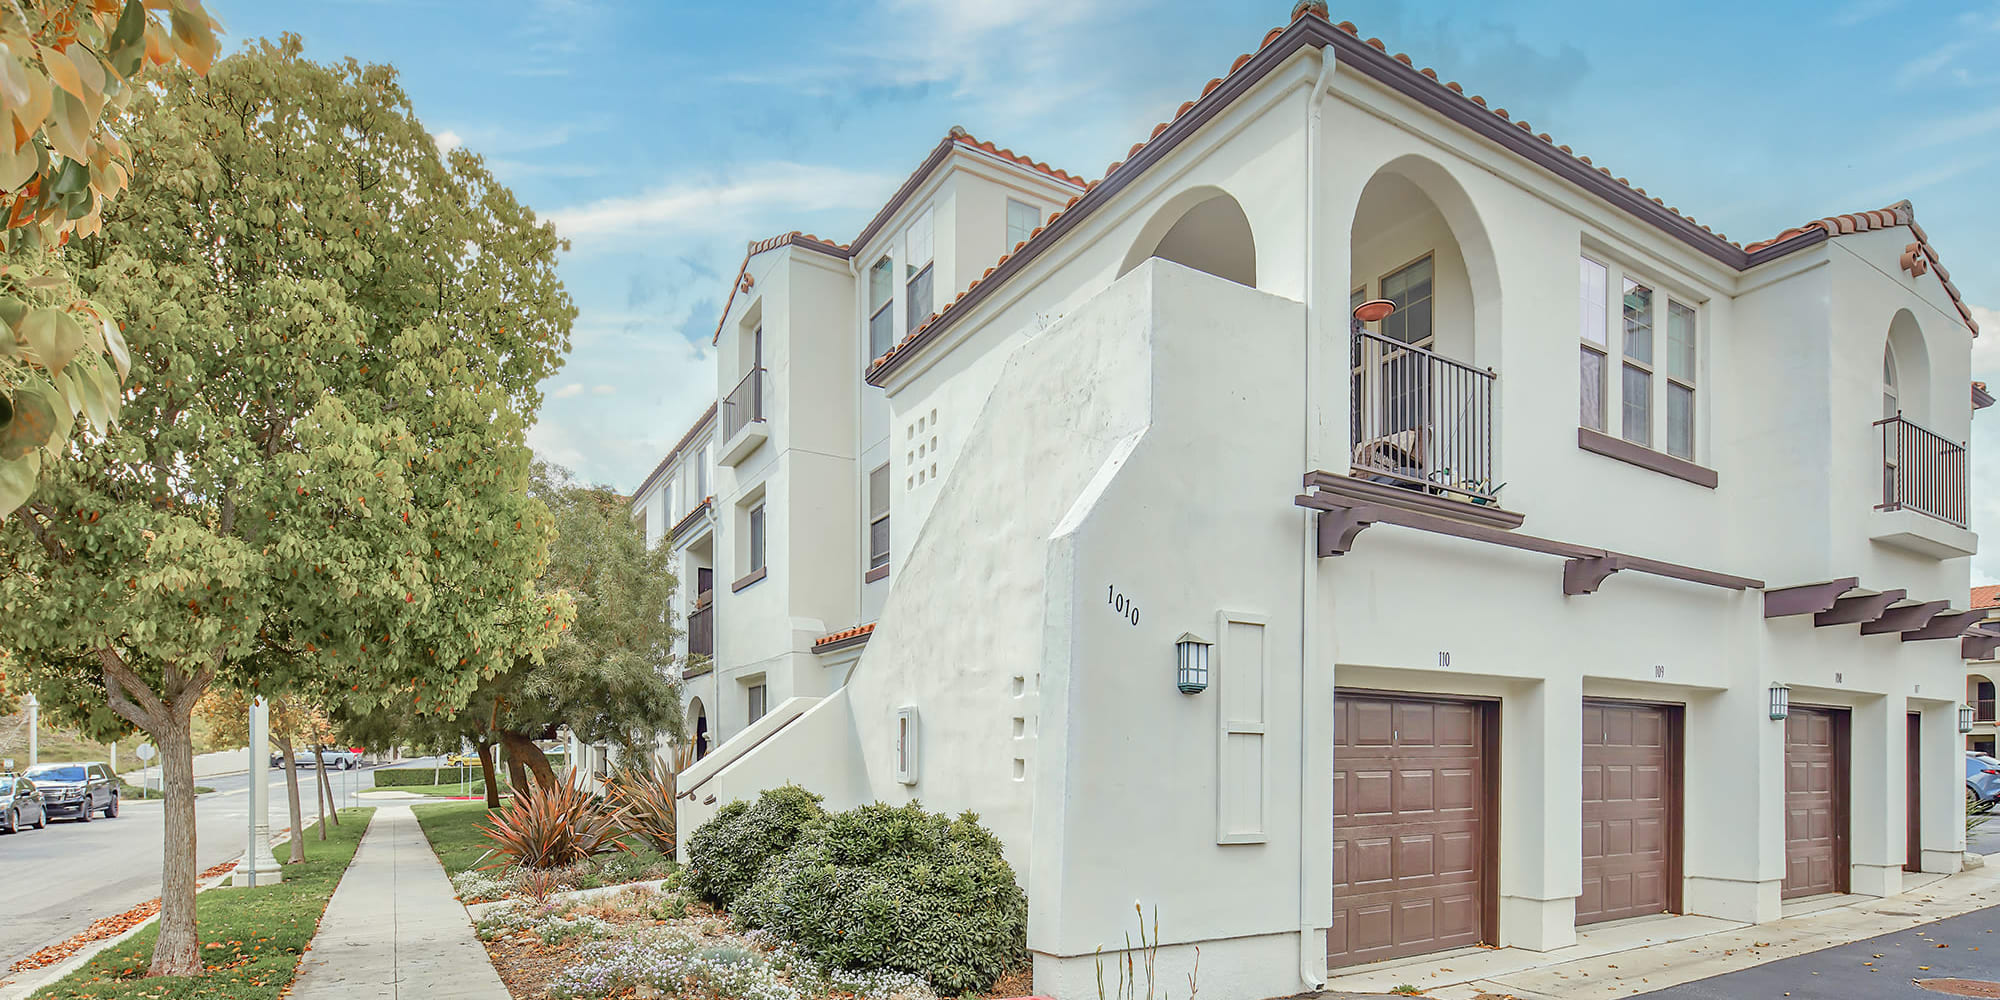 Private garages available at Mission Hills in Camarillo, California